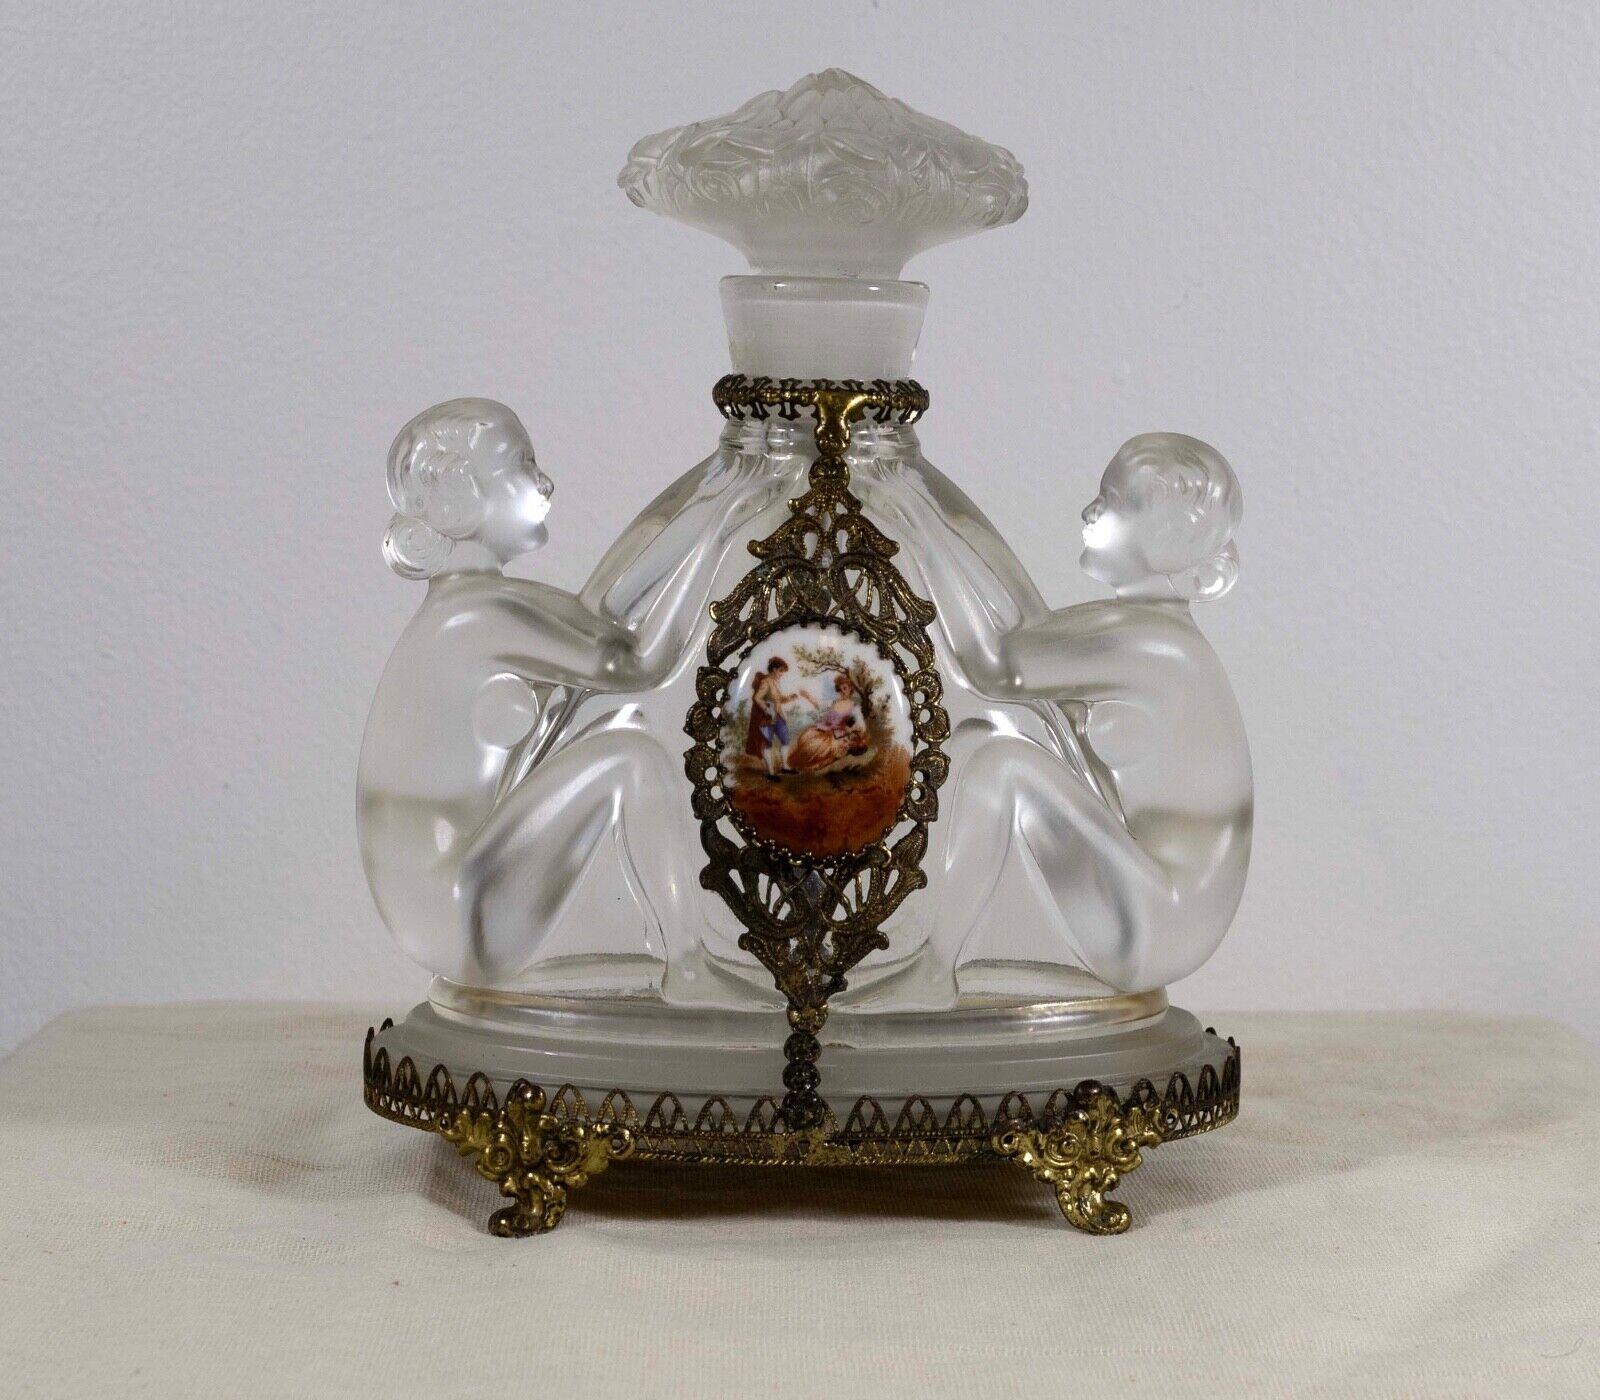 A lovely Art Deco glass perfume bottle designed by Joseph Inwald, Czechoslovakian, 1930s. Figurative nudes in clear glass, floral dauber stopper, gilt metalwork, and porcelain plaque. An elegant vintage collectable. From a private collection.